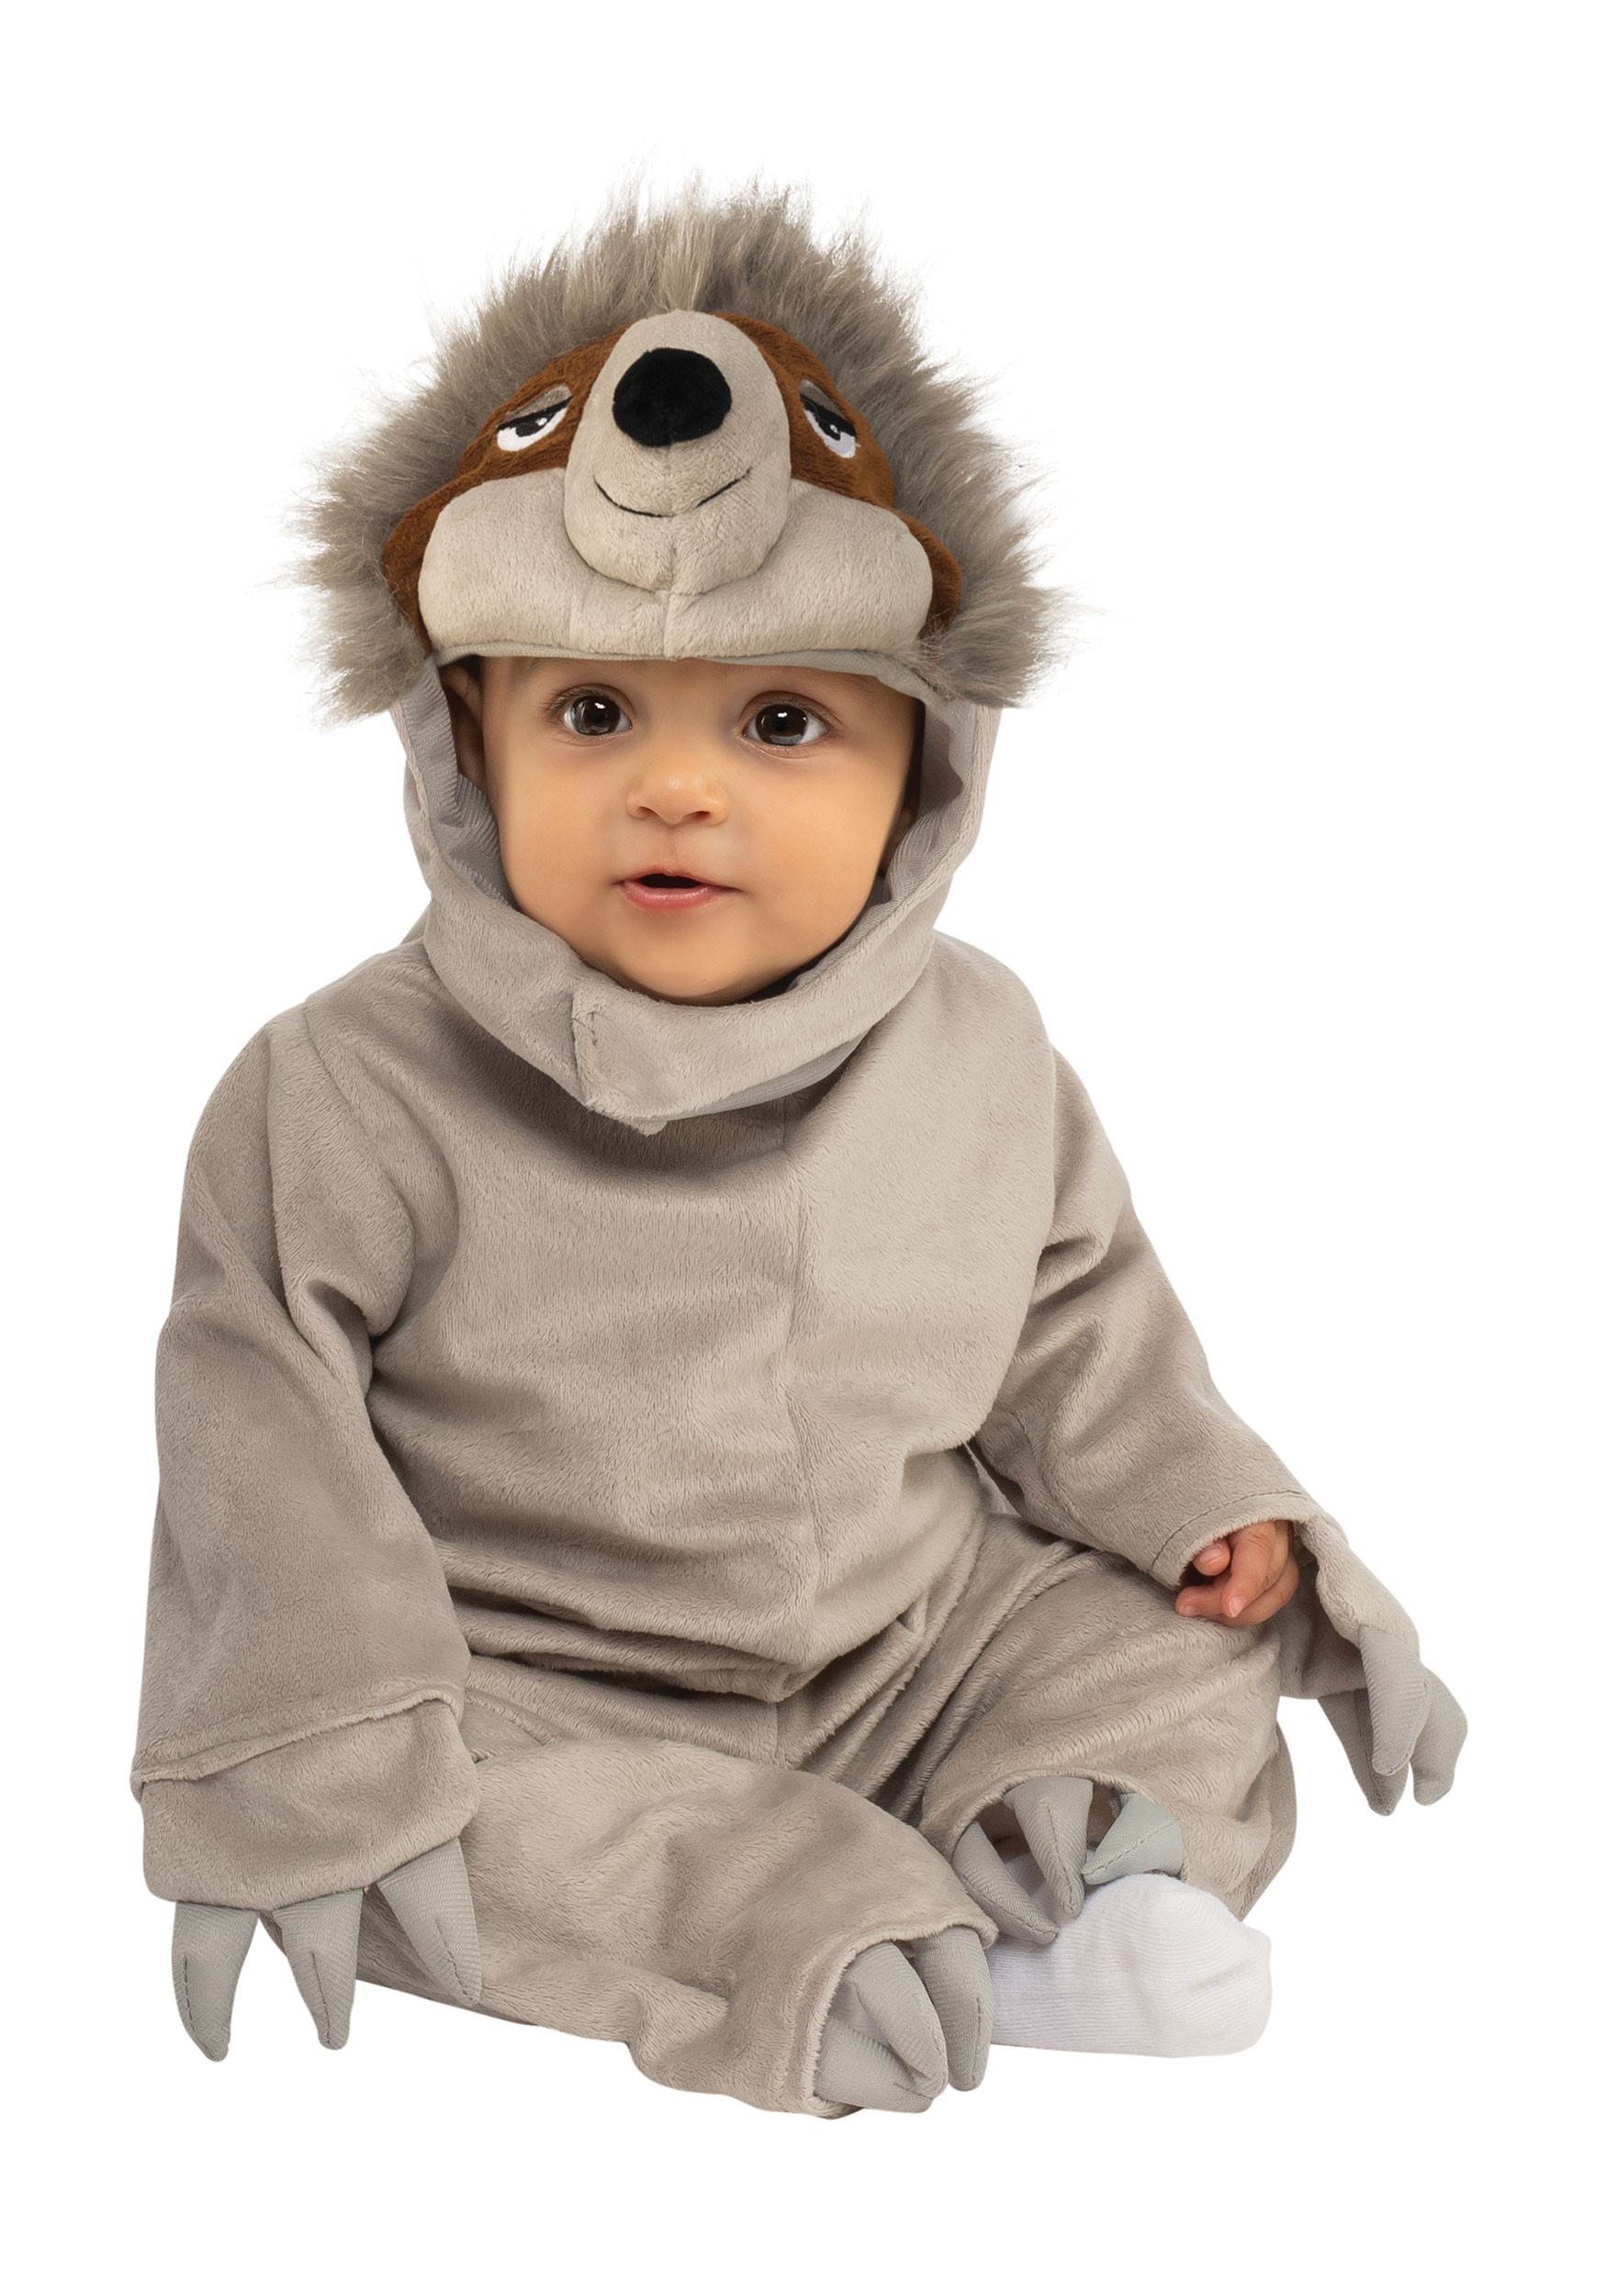 Lil Cuties Sloth Toddler Costume